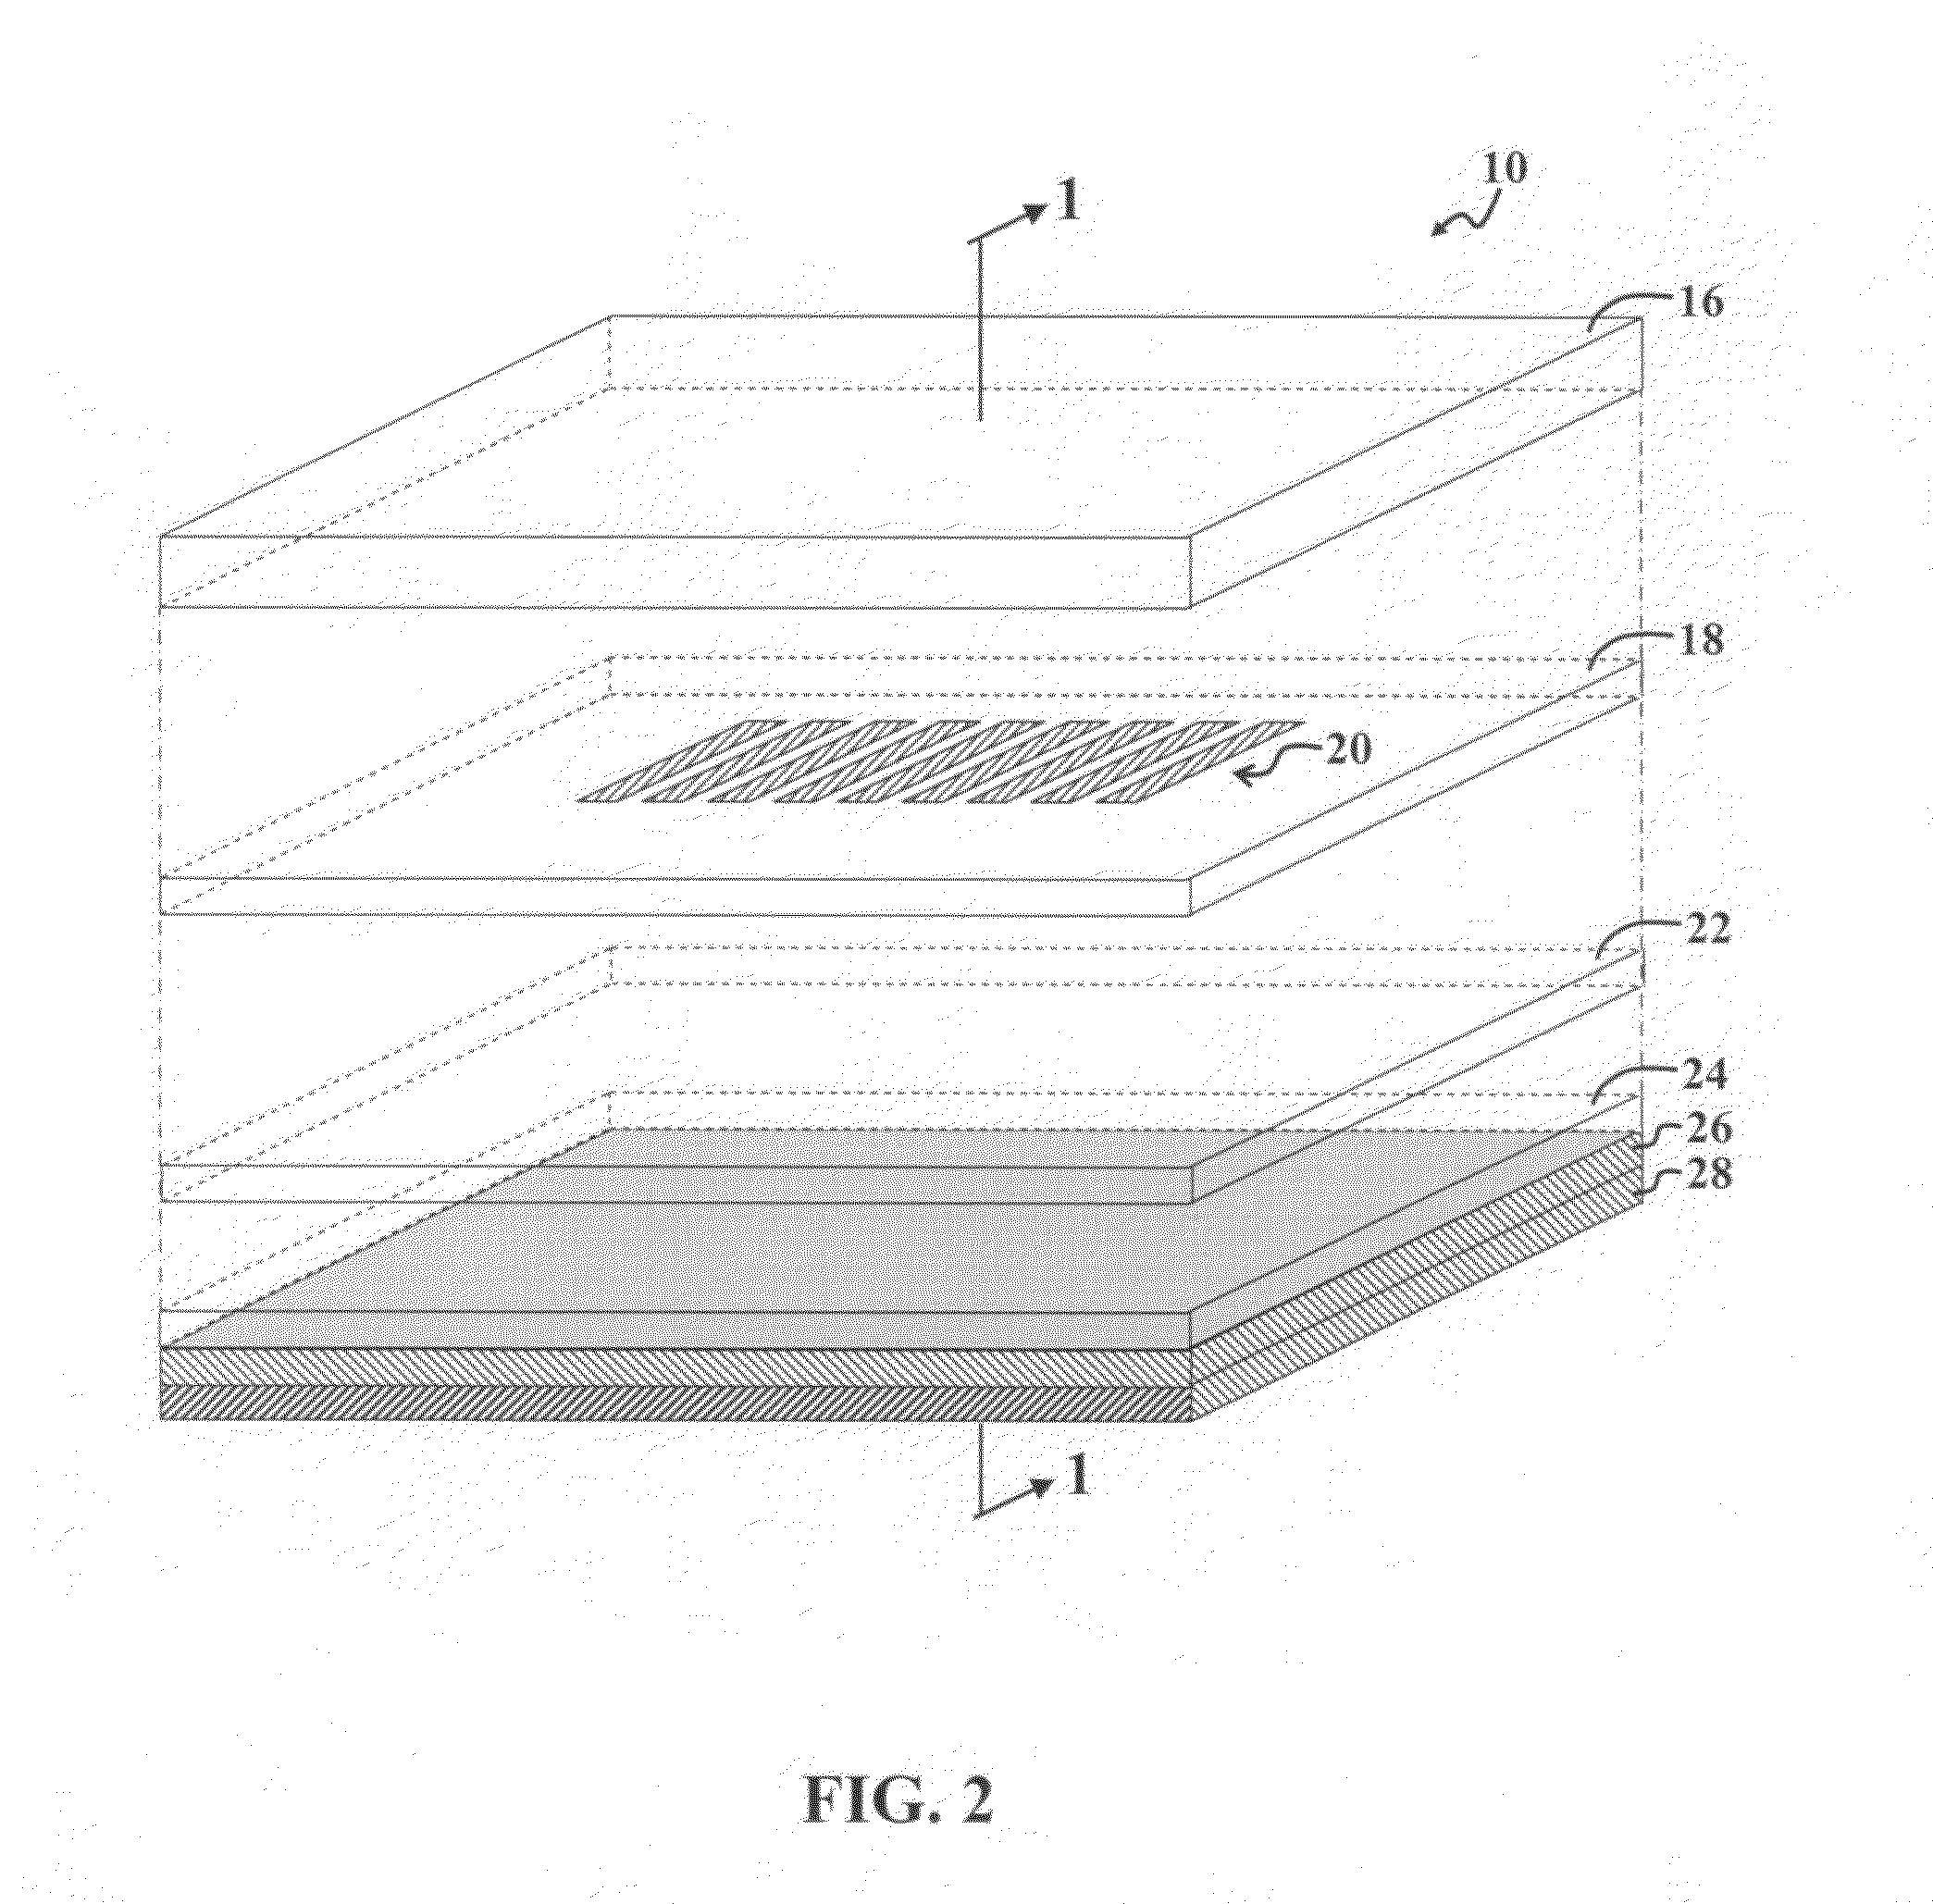 Superlens and lithography systems and methods using same